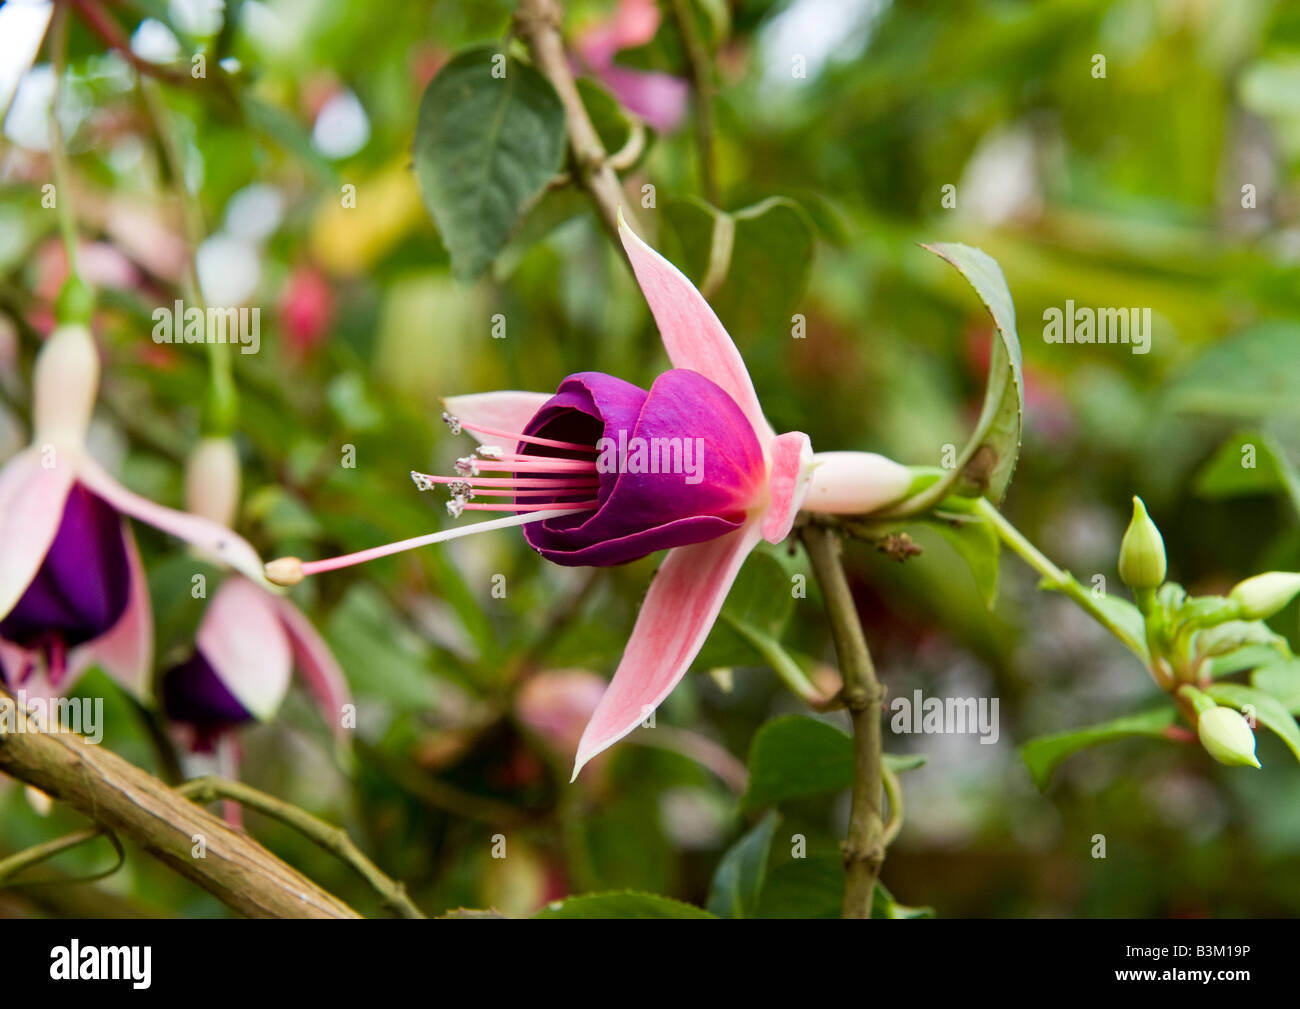 Fuchsia plants with serrated green leaves, buds, and large bell-shaped blooming flowers in magical deep purple and pink colours. Stock Photo